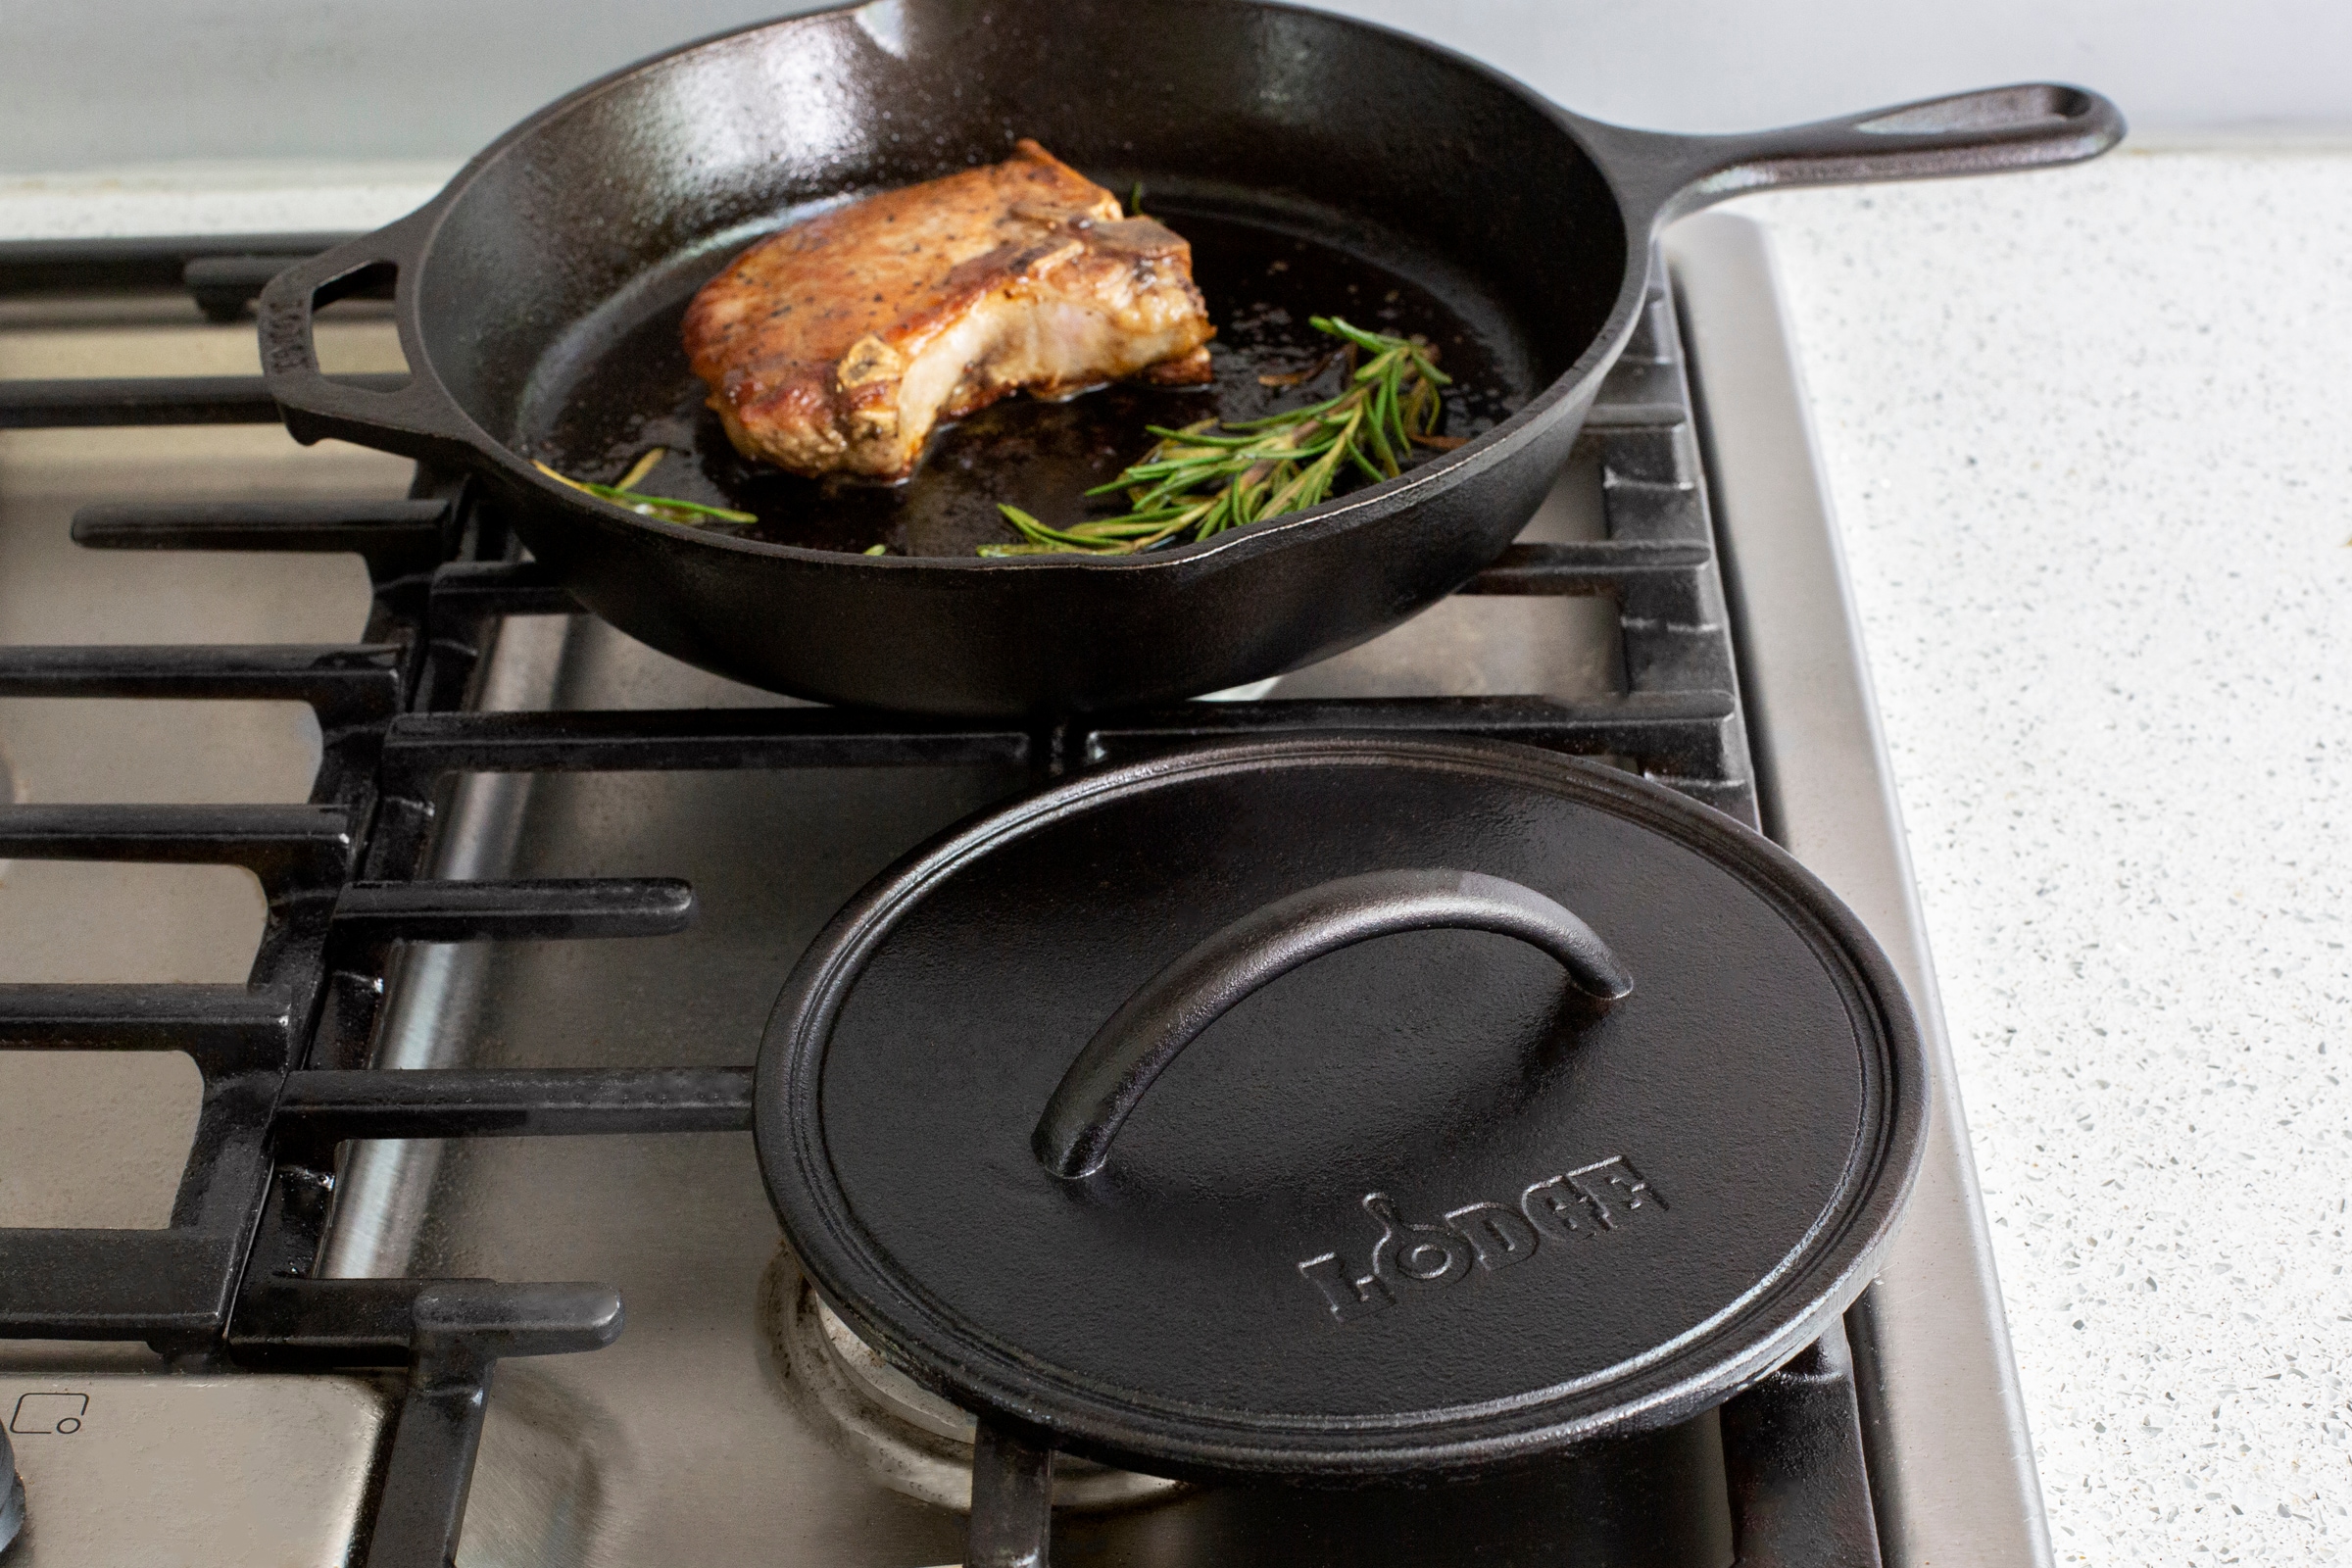 Lodge Cast Iron Scraper Combo 1 Pan and 1 Grill Pan